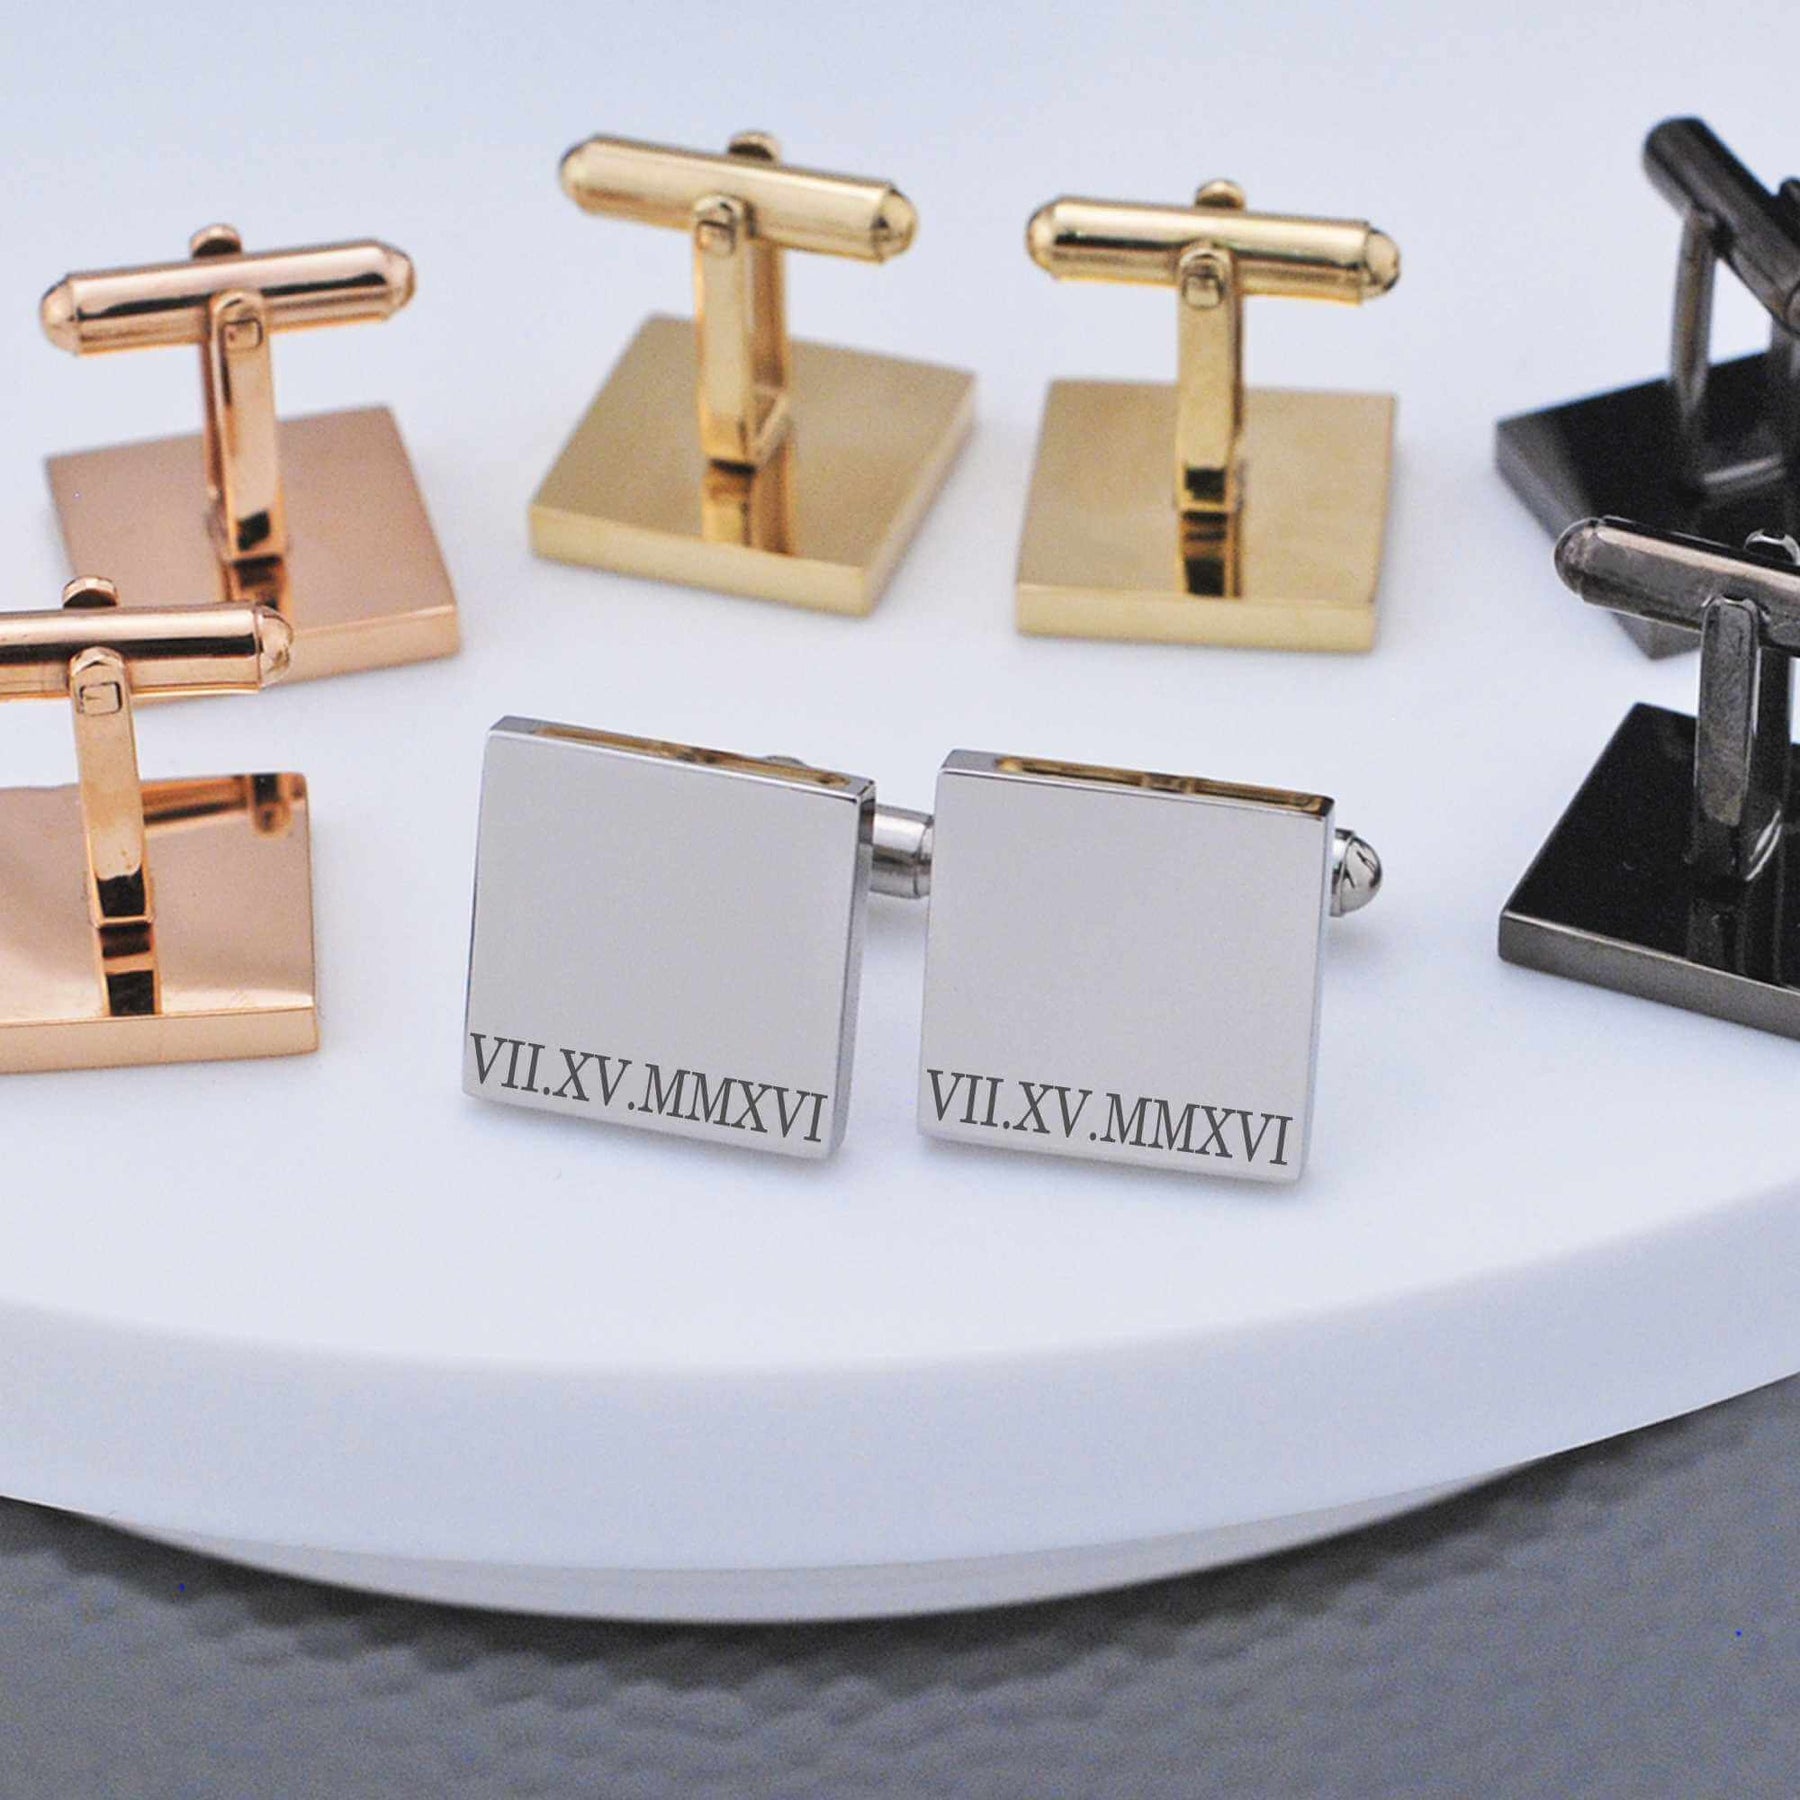 Roman Numeral Cufflinks – Personalized Gift for Men - Love, Georgie